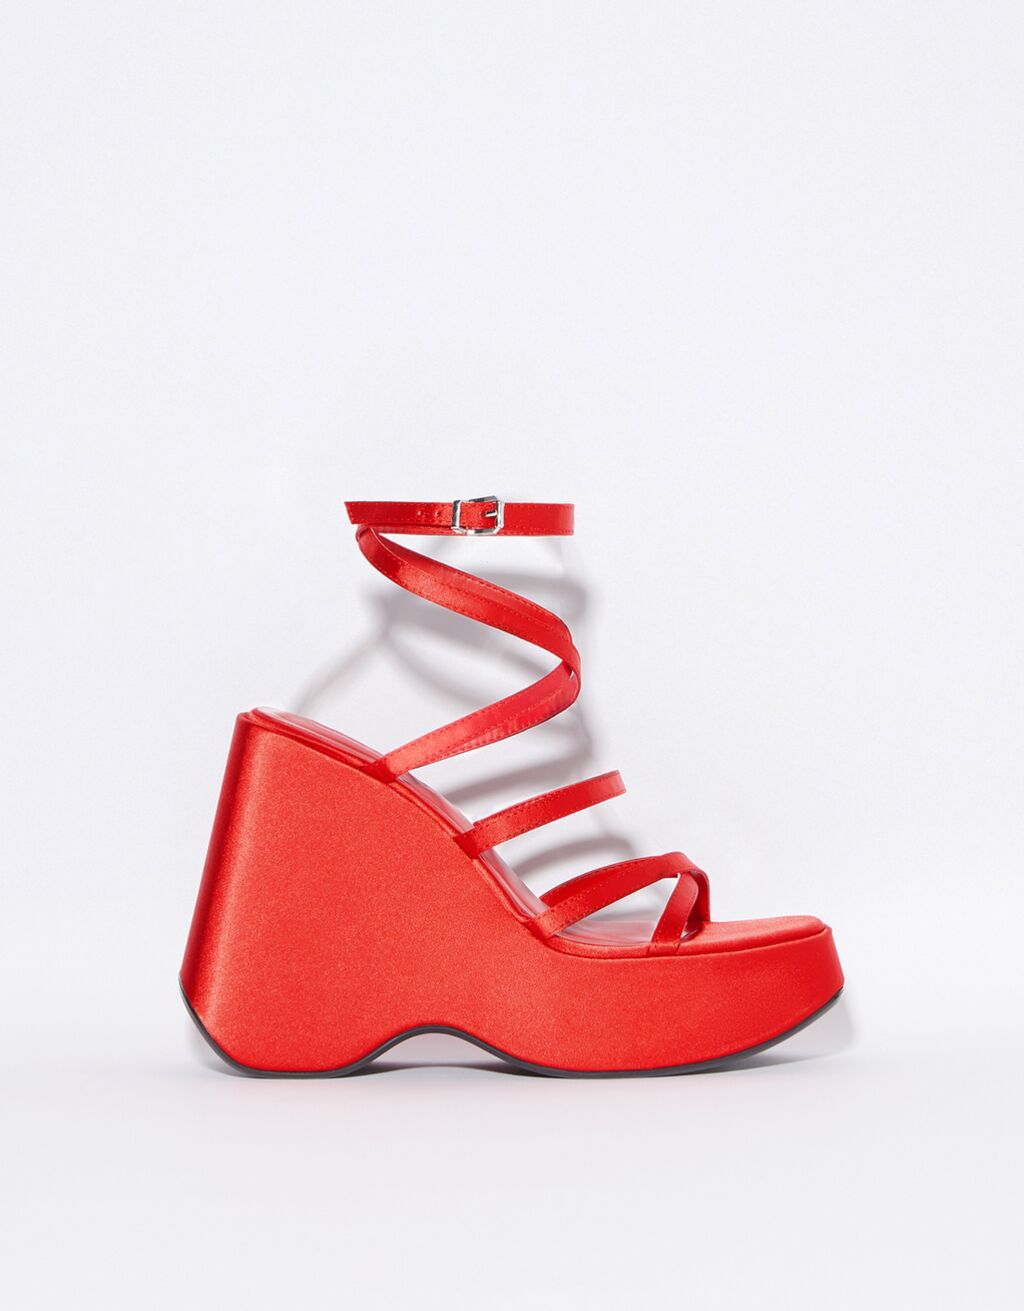 Wedge sandals with multiple straps